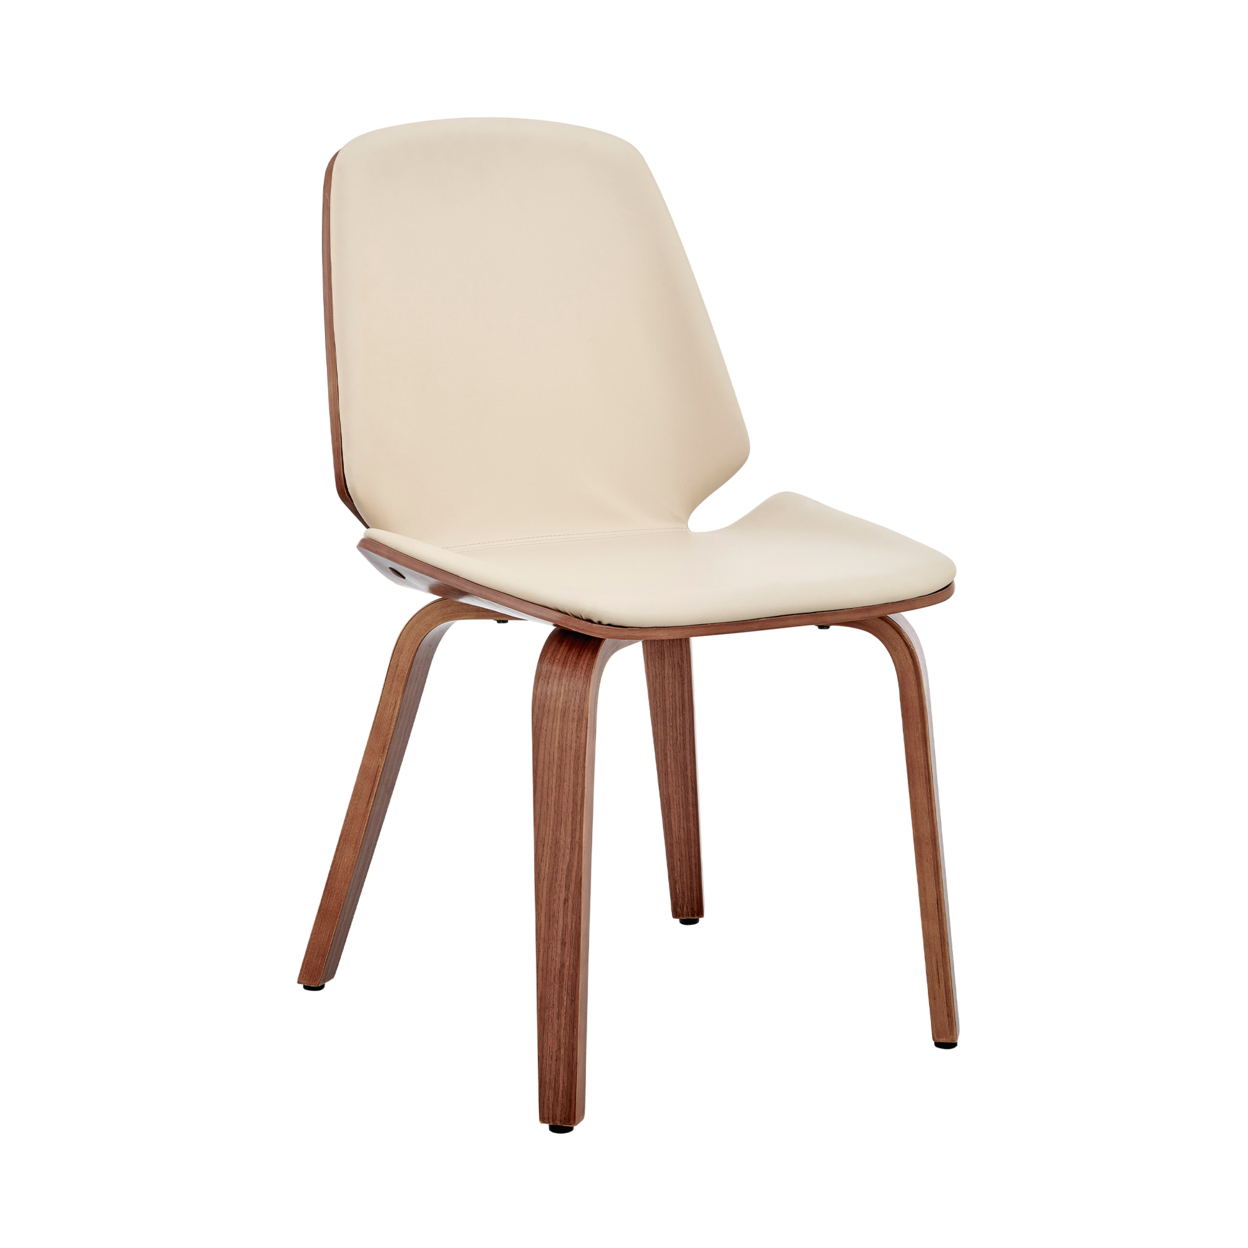 Leatherette Dining Chair With Slightly Curved Seat, Cream- Saltoro Sherpi